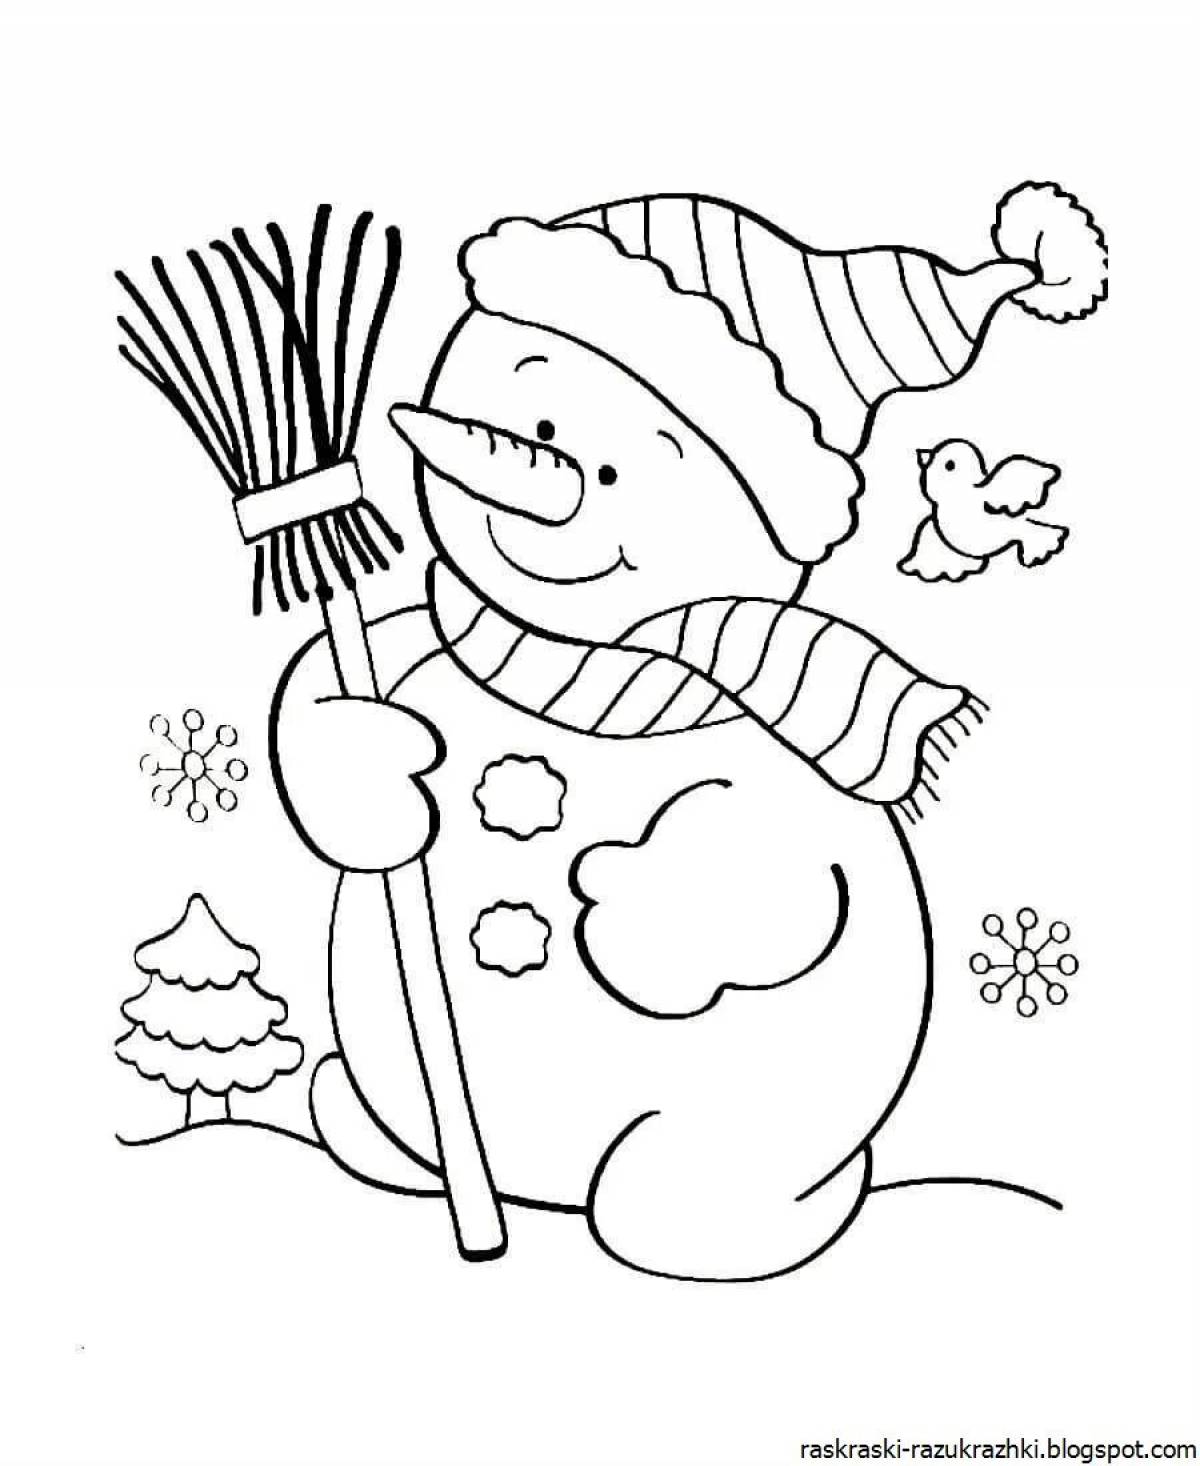 Amazing funny snowman coloring book for kids